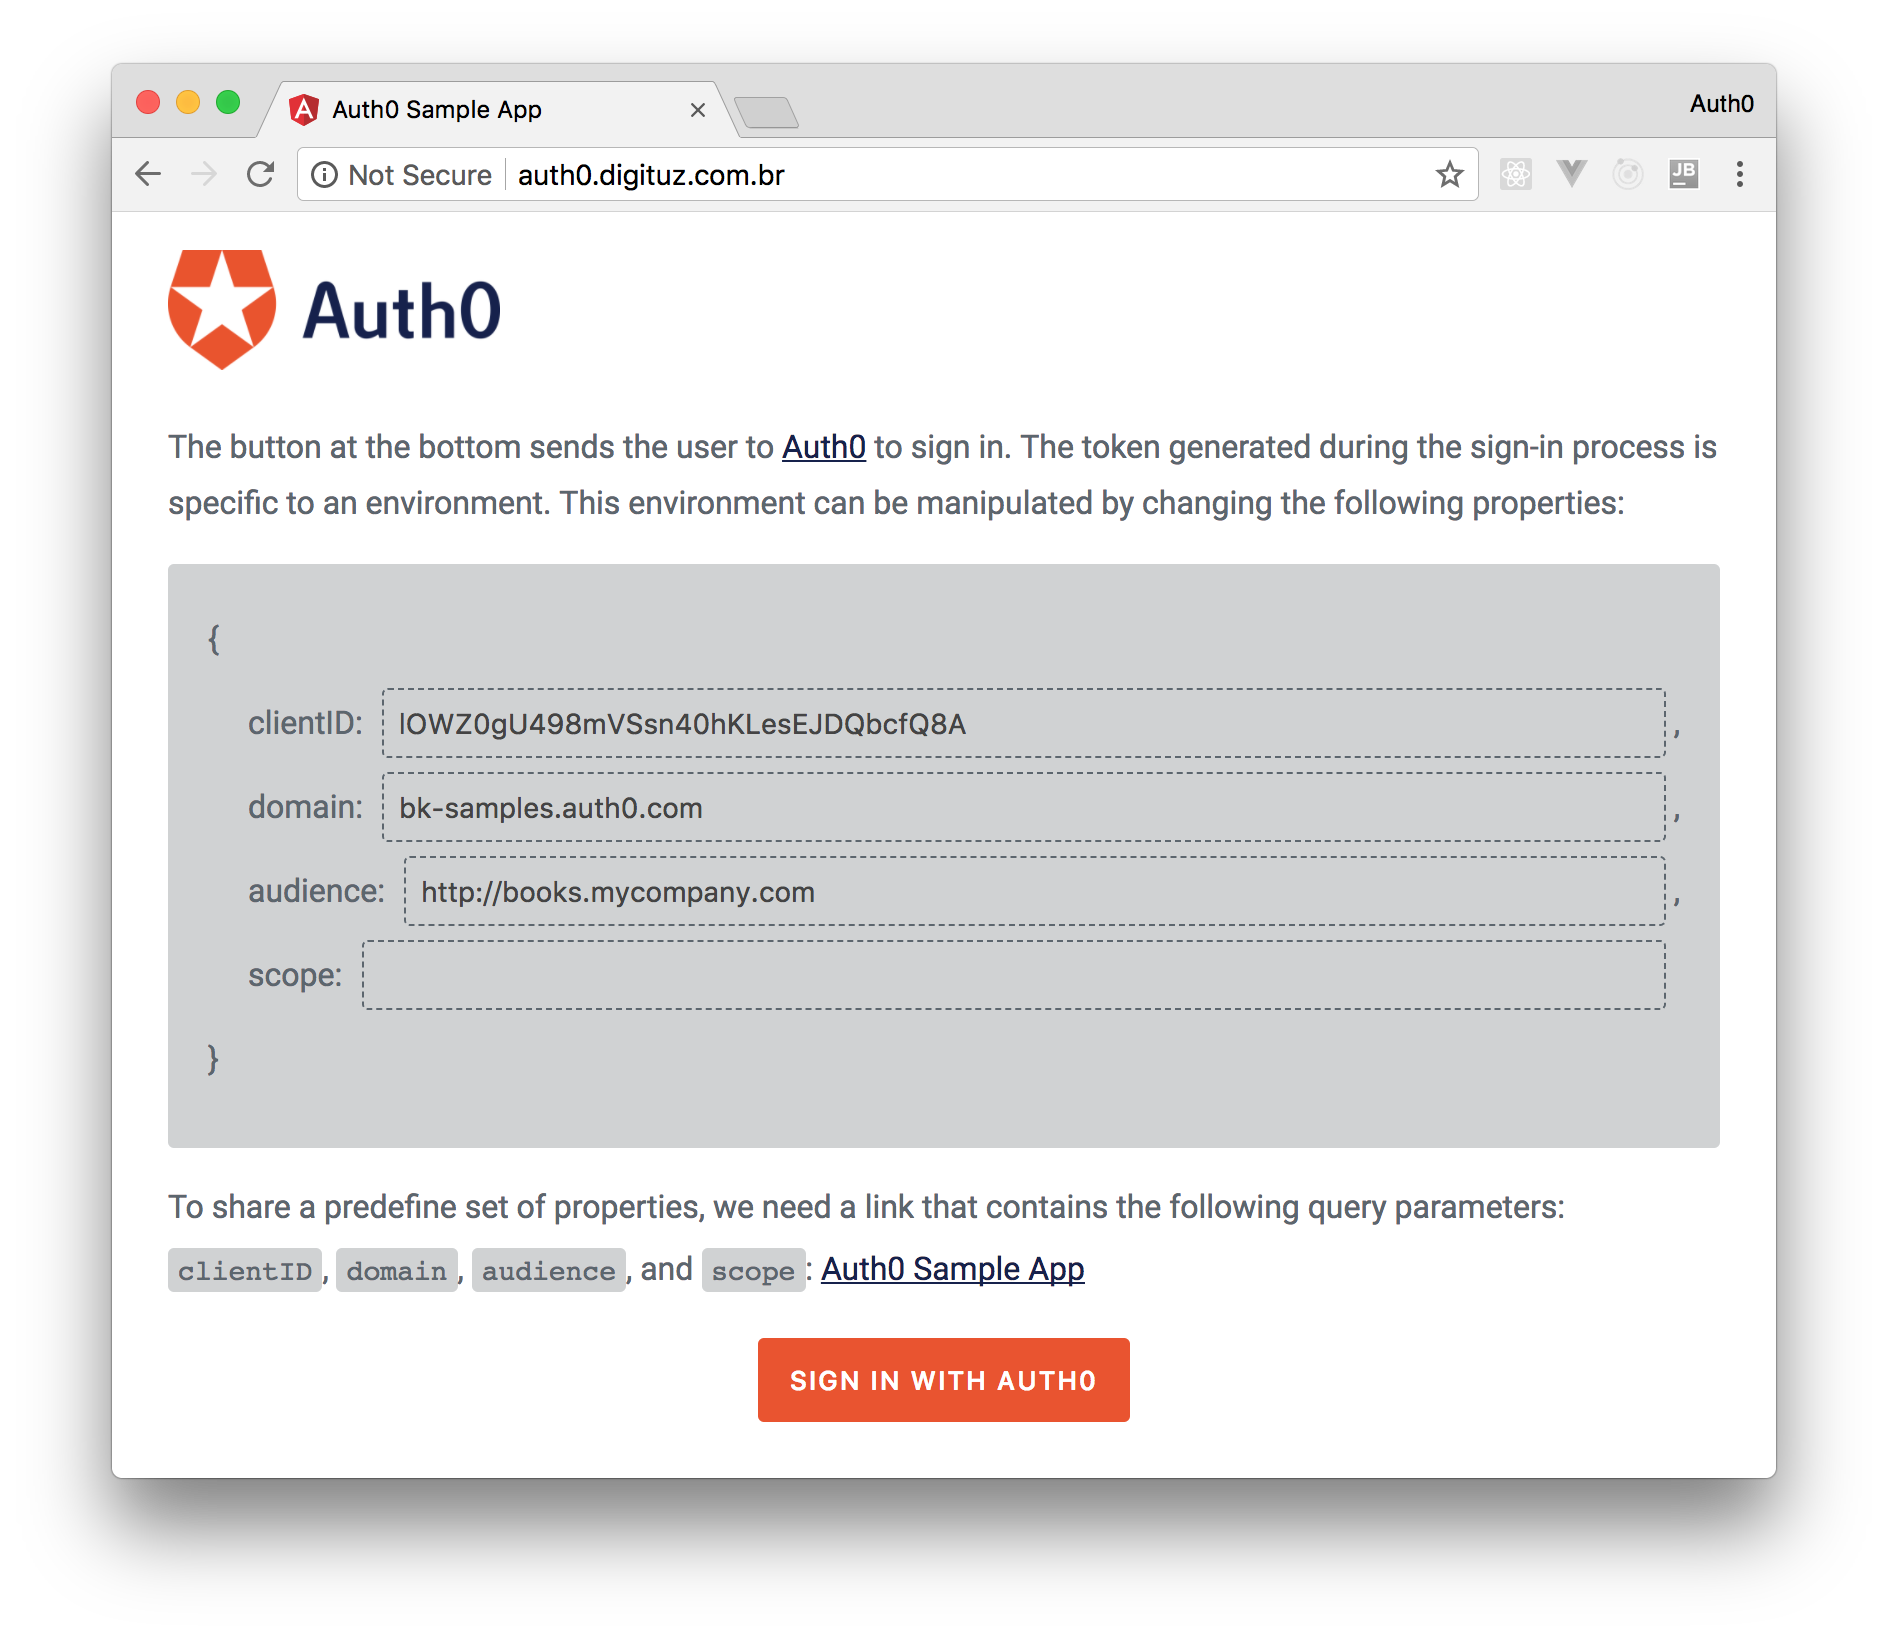 Testing integration with Auth0